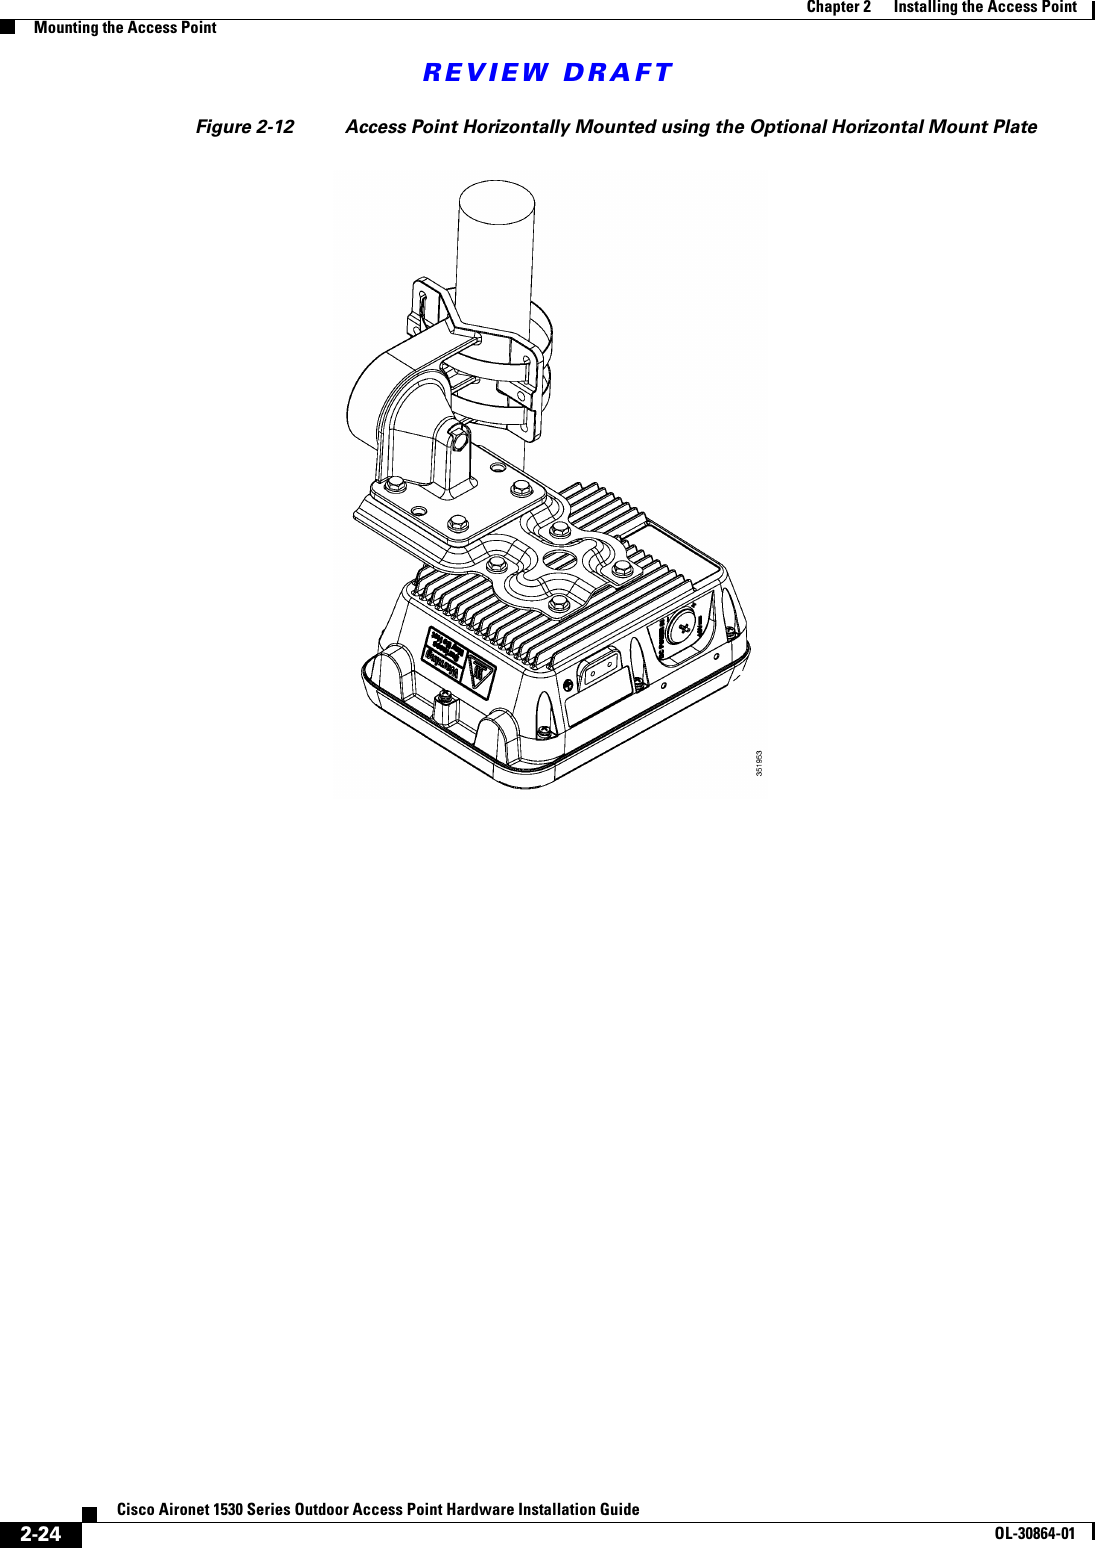 REVIEW DRAFT2-24Cisco Aironet 1530 Series Outdoor Access Point Hardware Installation GuideOL-30864-01Chapter 2      Installing the Access PointMounting the Access PointFigure 2-12 Access Point Horizontally Mounted using the Optional Horizontal Mount Plate